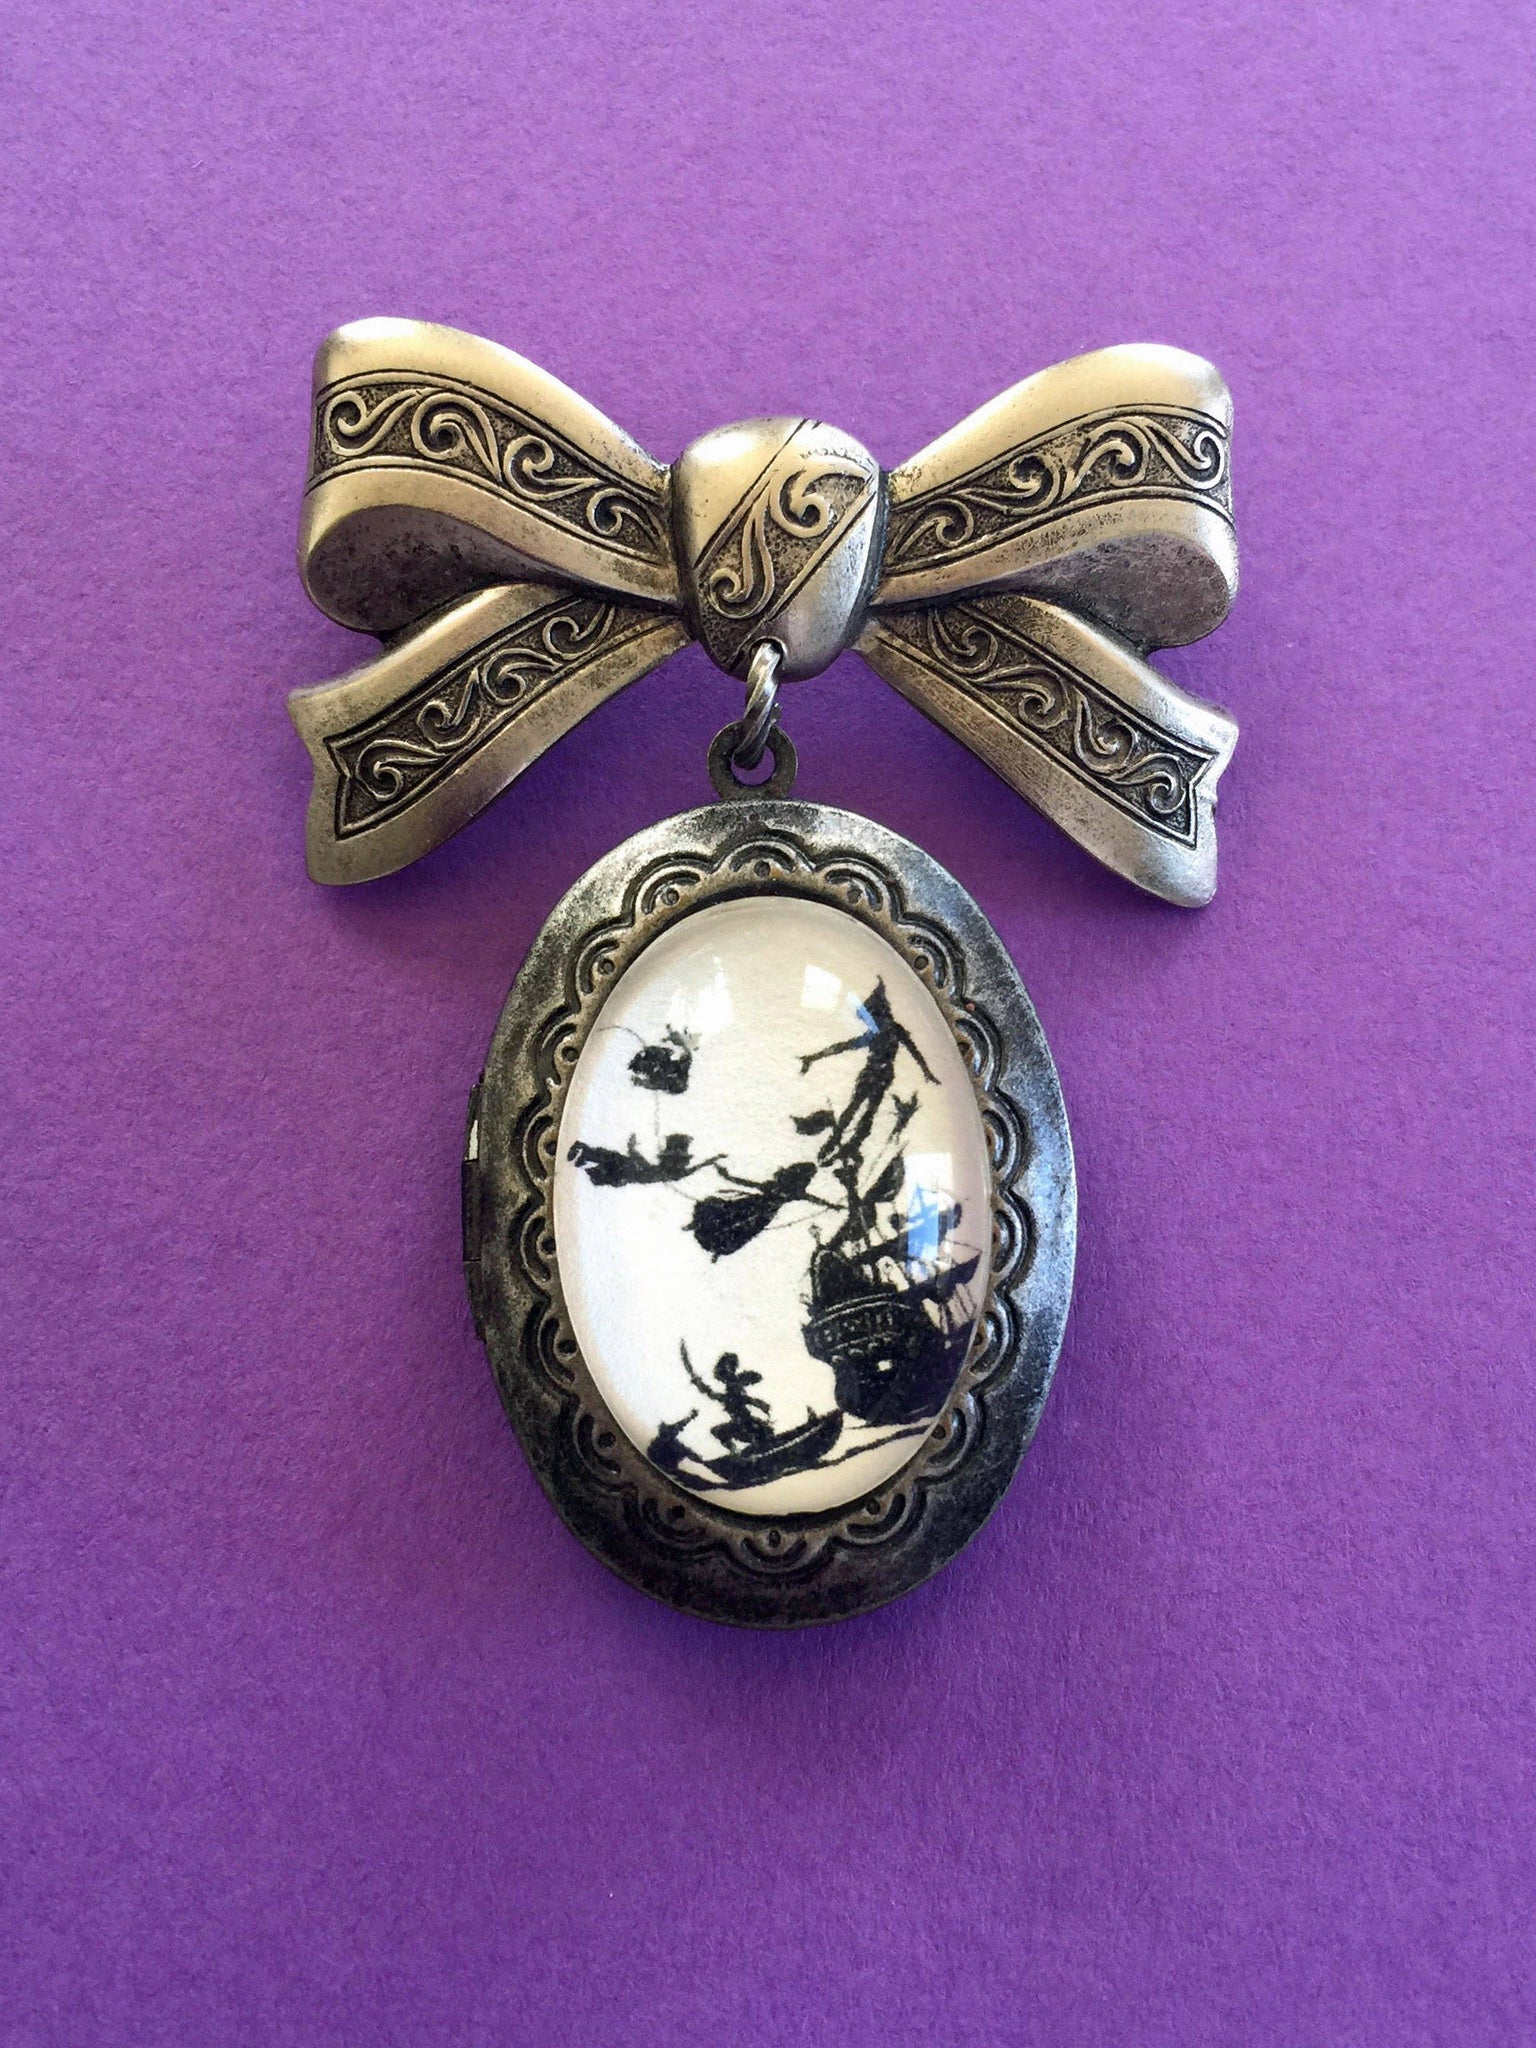 PETER PAN Brooch - locket pendant on bow pin - Silhouette Jewelry